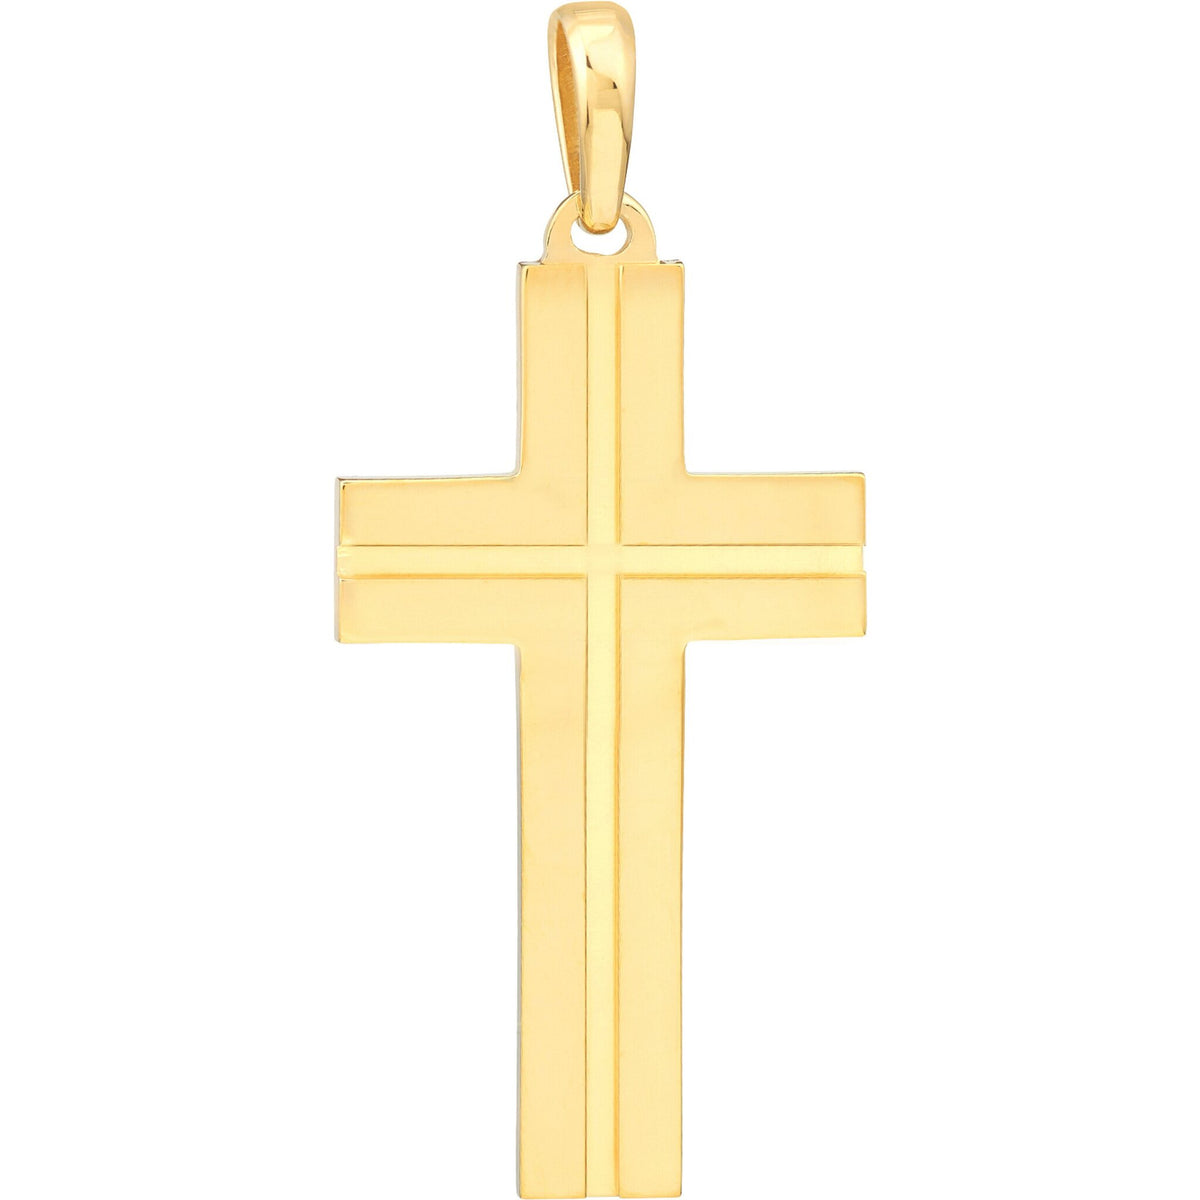 Olas d'Oro Necklace - 14K Yellow Gold Fancy Polished Grooved Cross